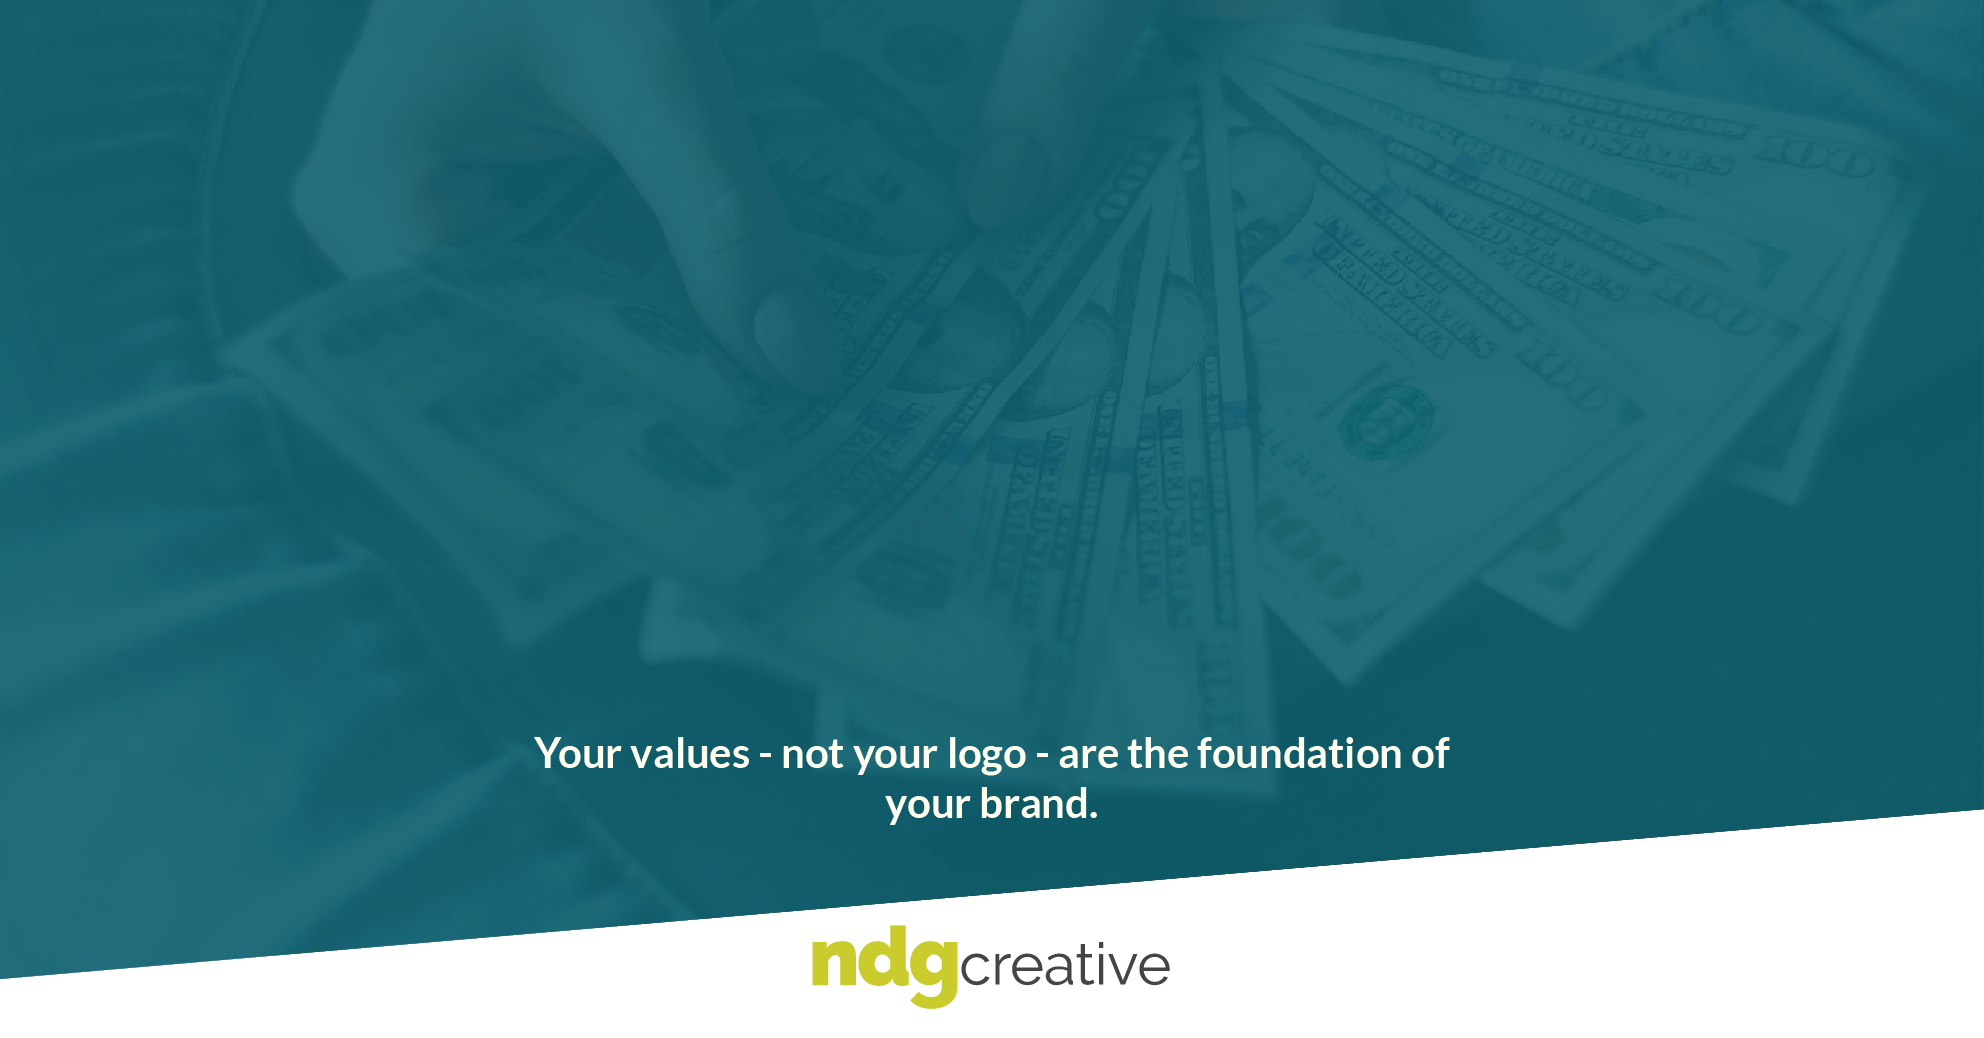 Your values, not your logo, are the foundation of your brand.